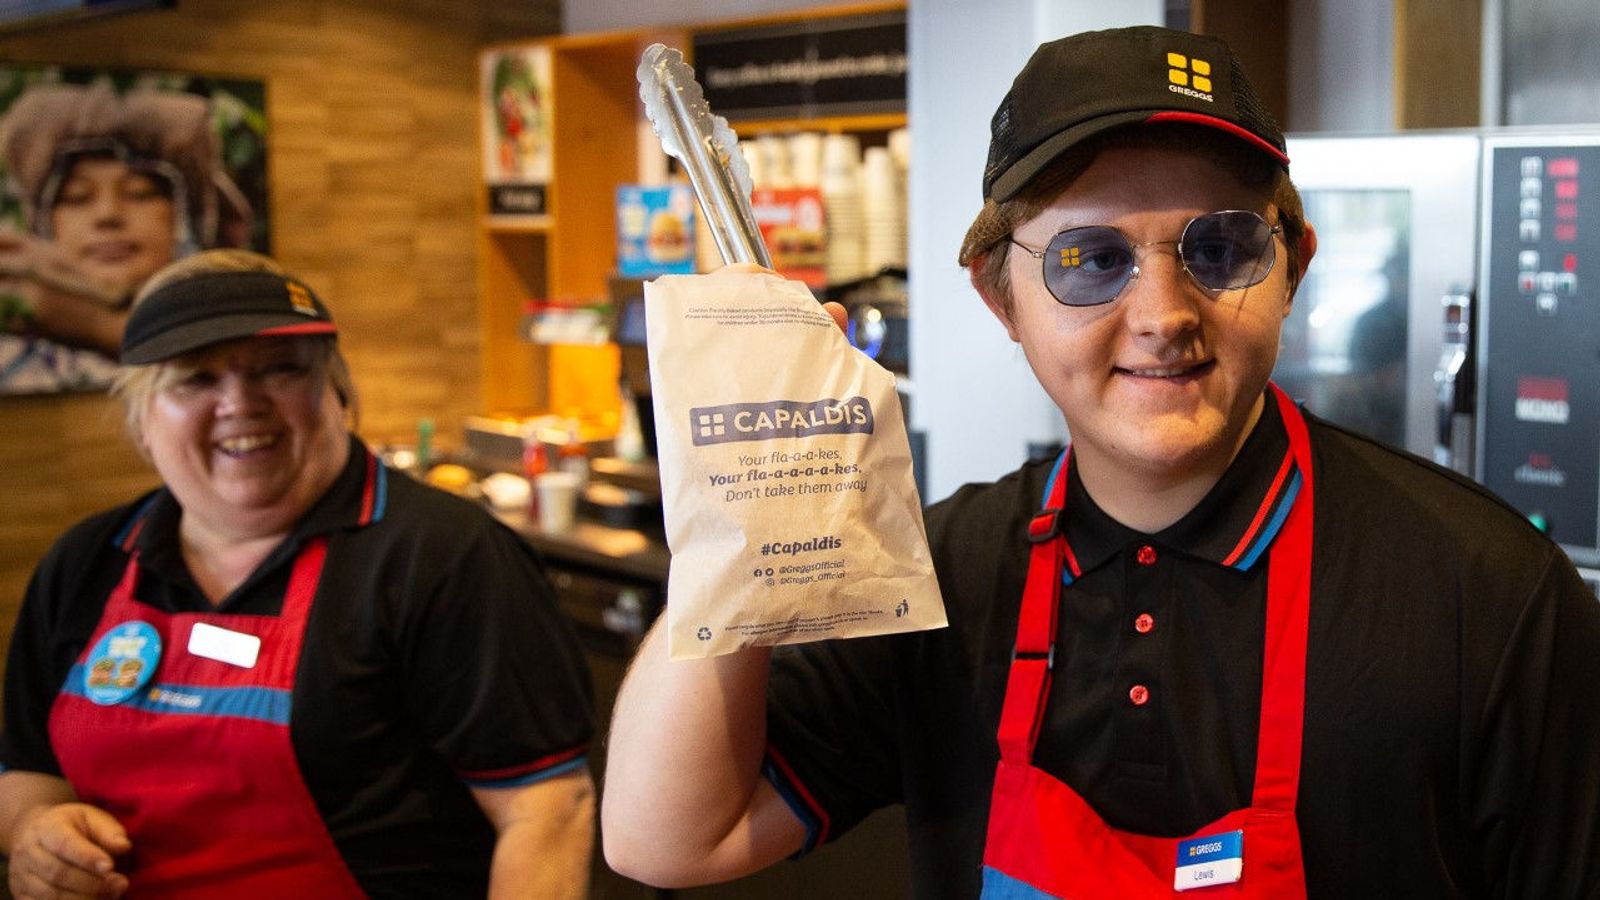 lewis-capaldi-takes-a-break-from-festival-to-serve-up-sausage-rolls-in